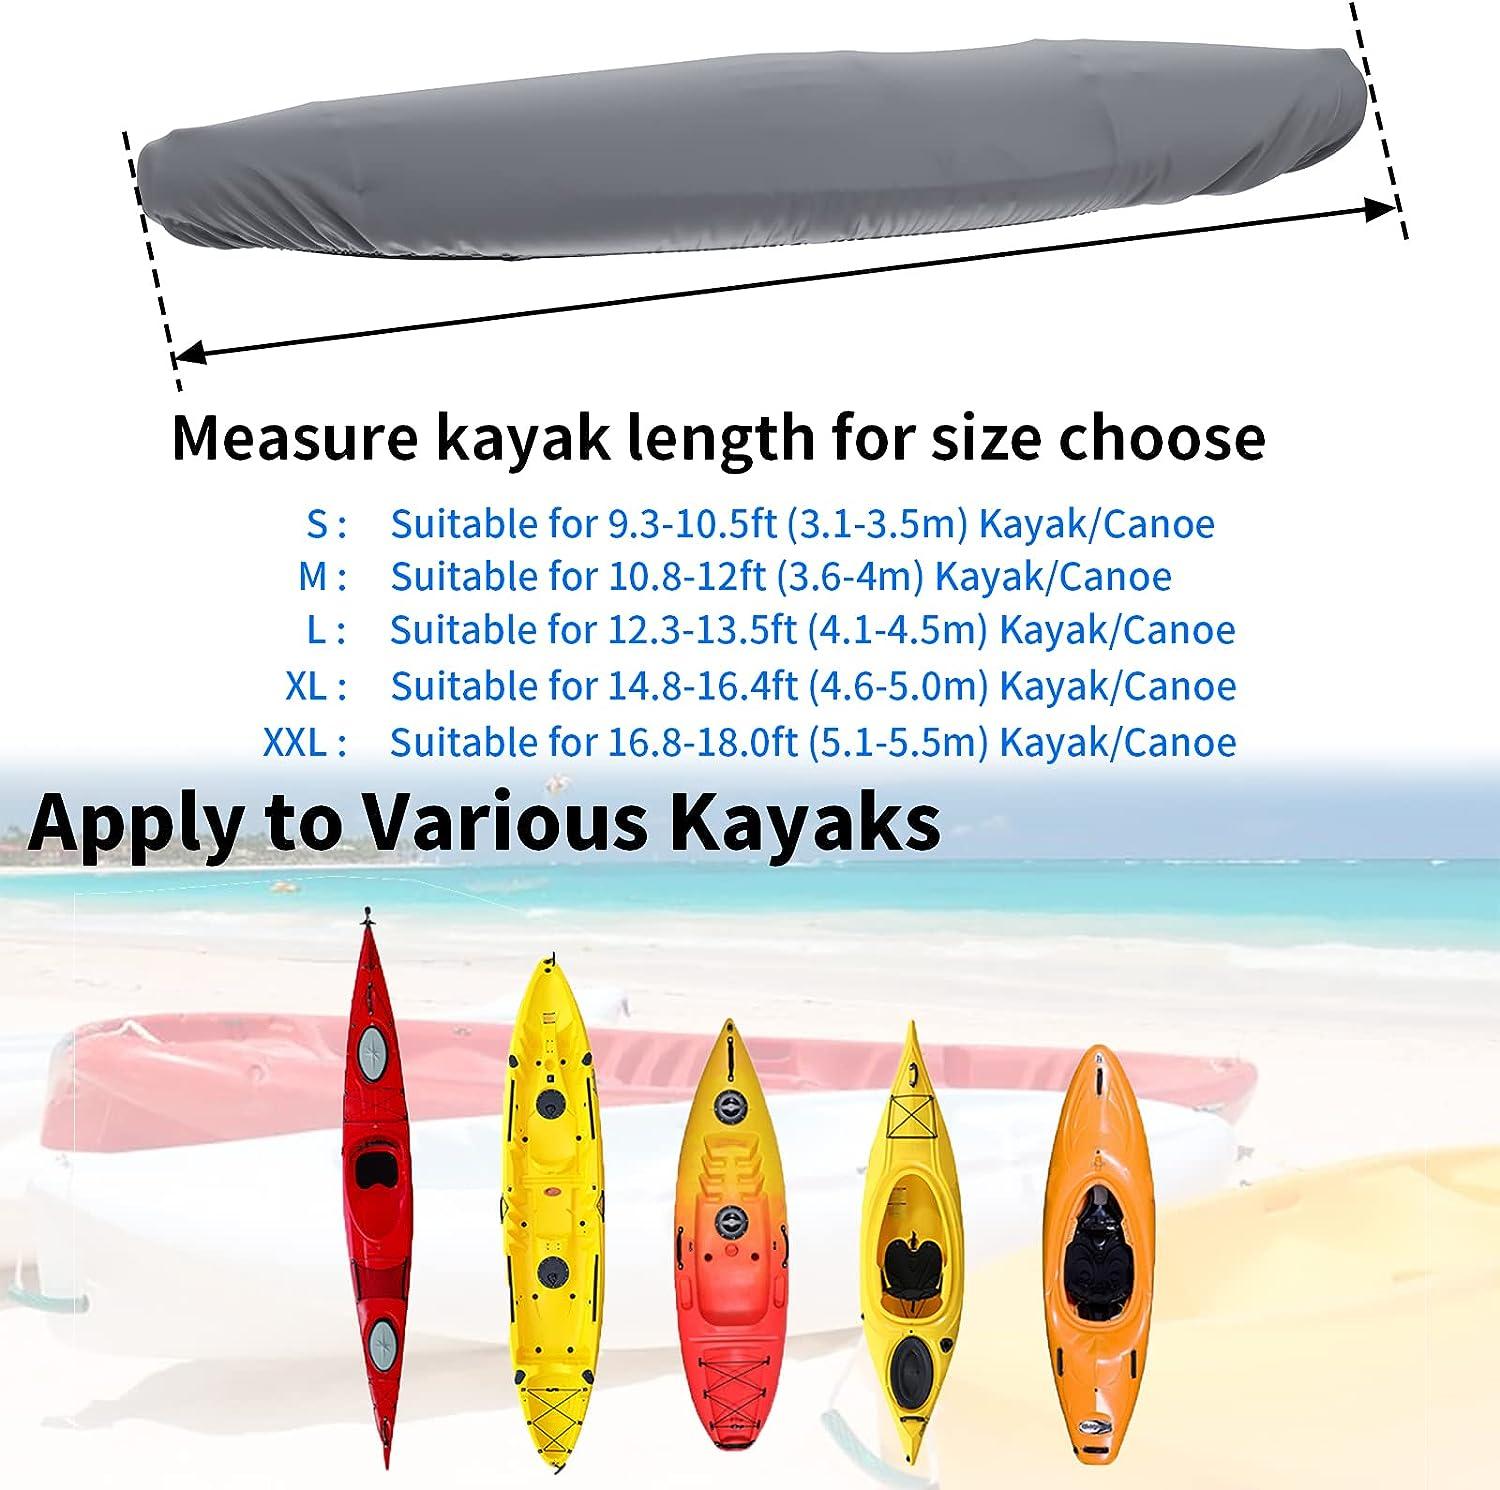 MirMengs Waterproof 420D Kayak Cover, 9.3-18ft Extra Thick UV Protection Kayak  Covers for Outdoor Storage, Universal Canoe Storage Dust Cover Sunblock  Shield for Fishing Boat Paddle Board M (For 10.8-12ft kayak) Gray